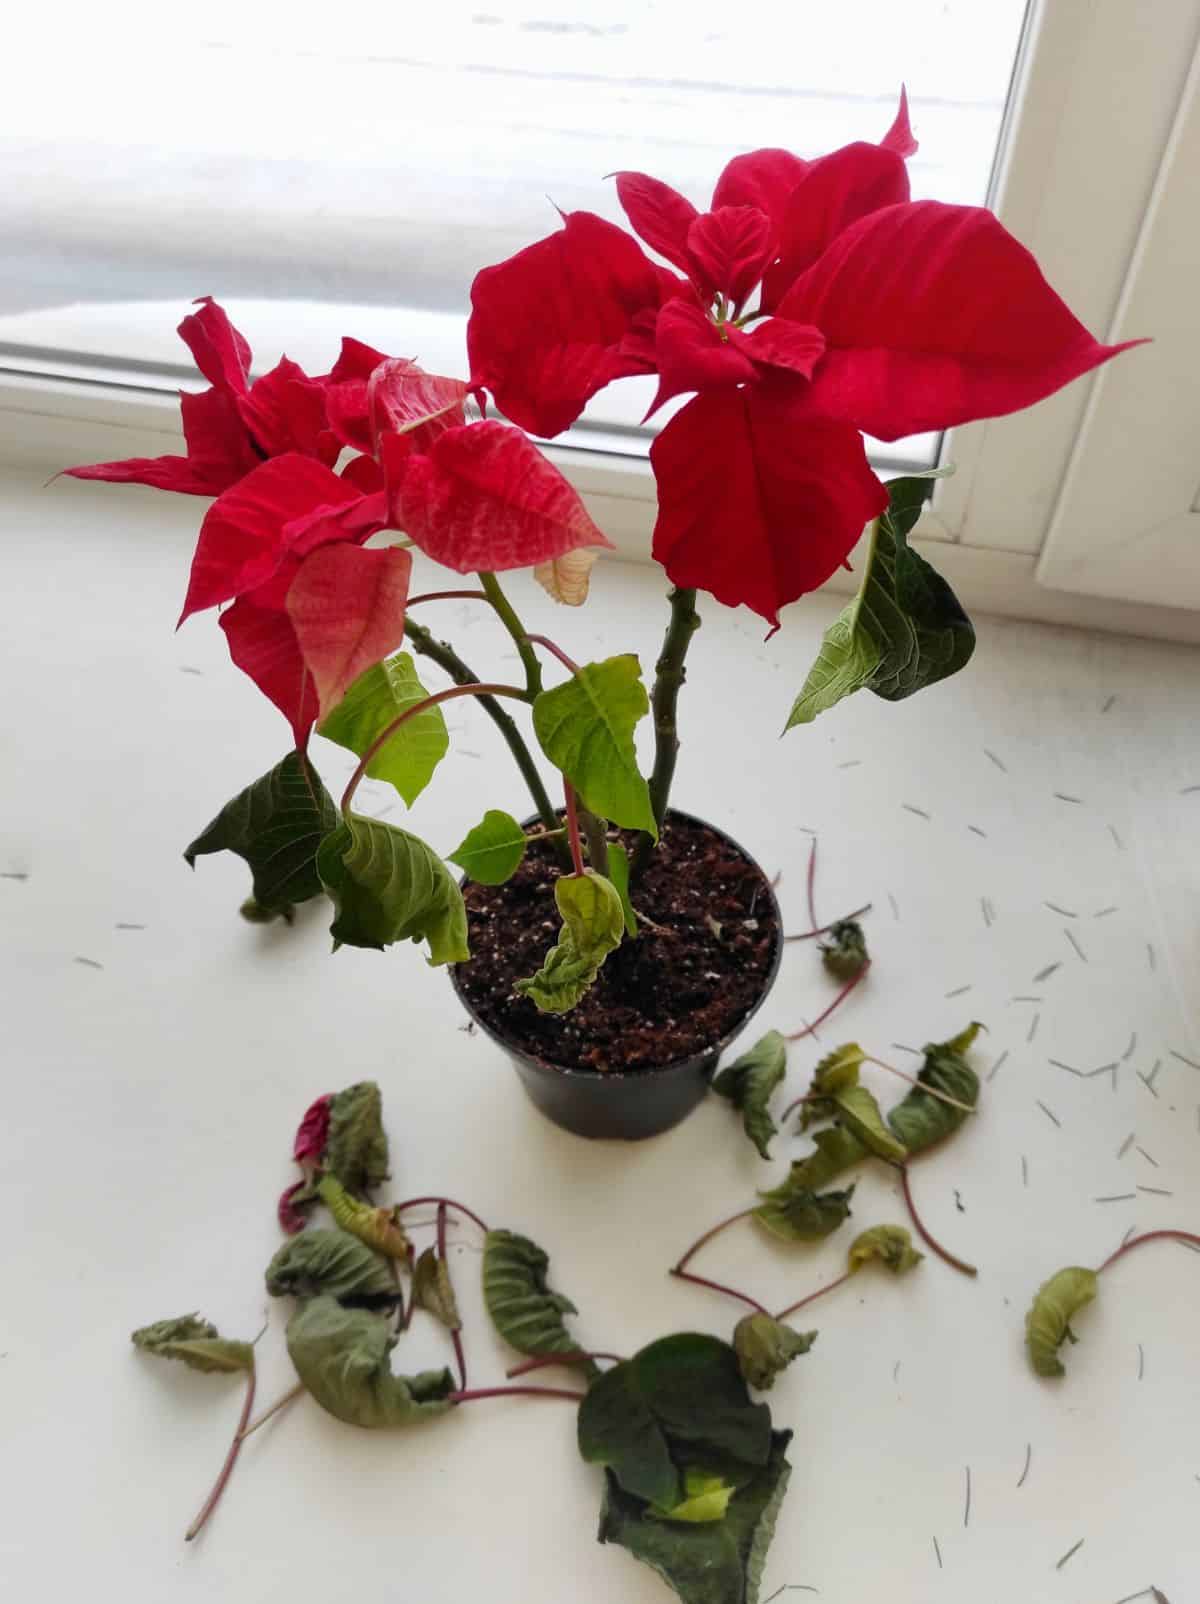 A sick poinsettia plant with dropped leaves.